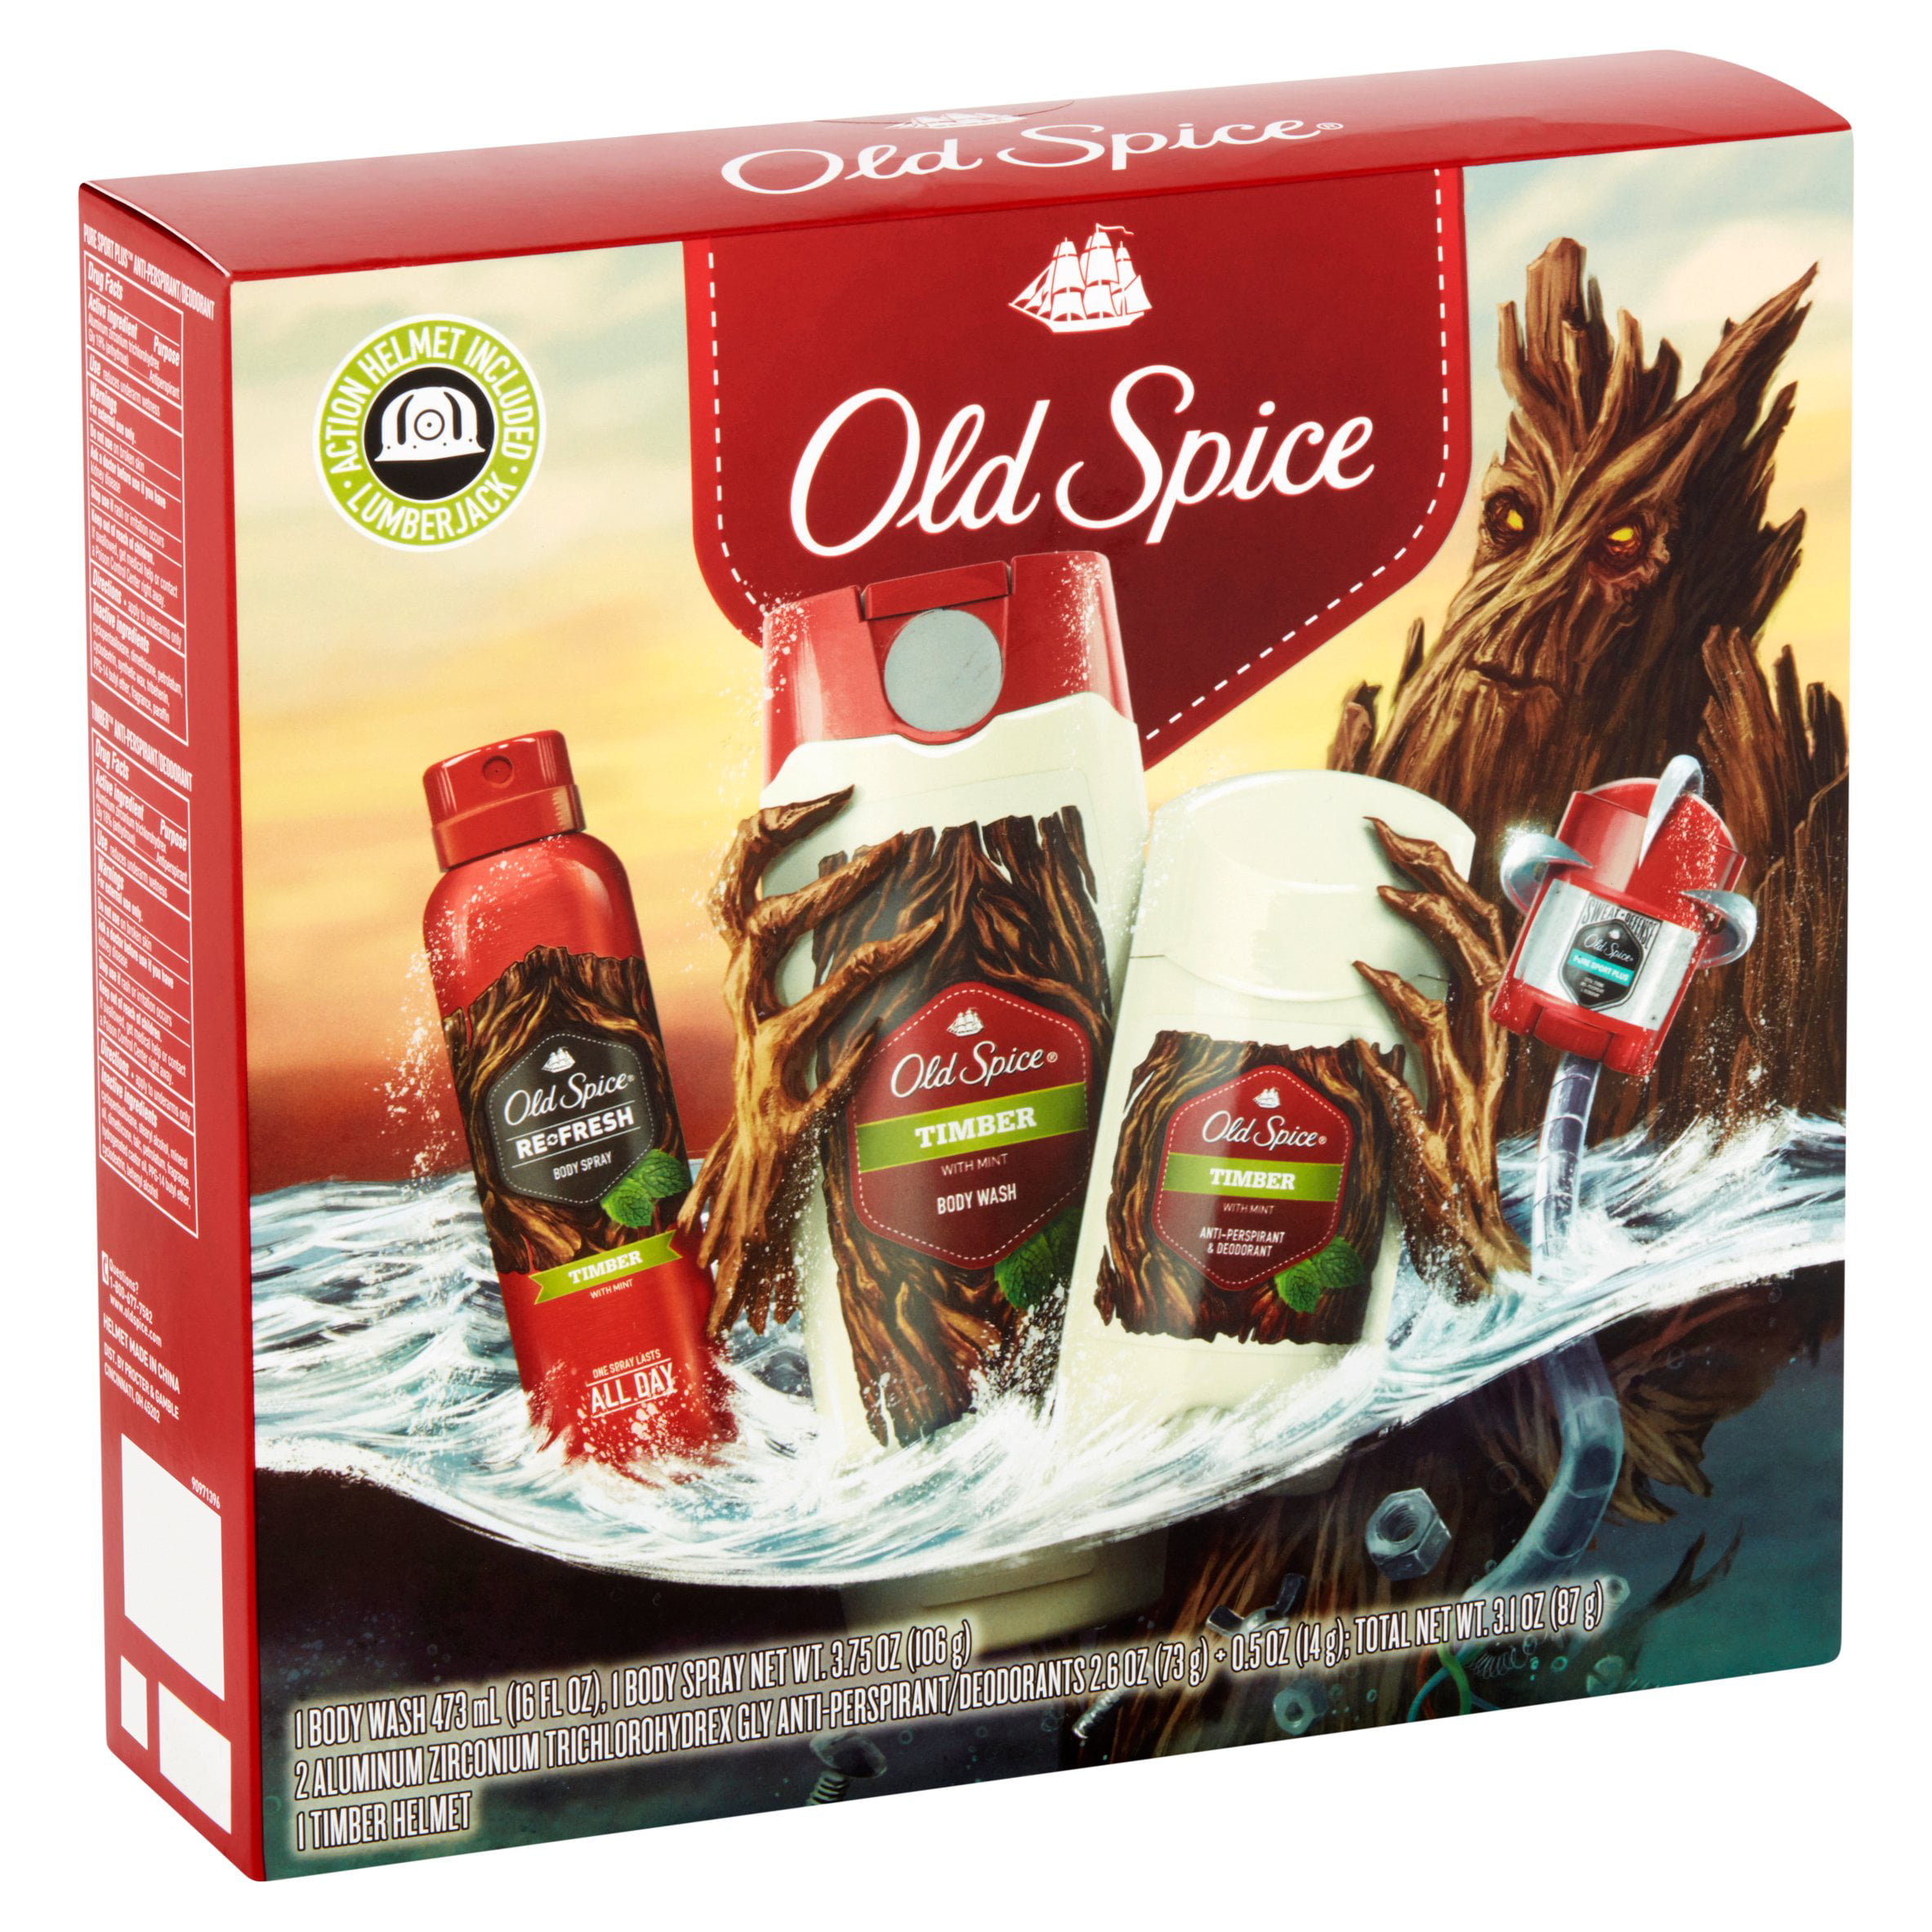 Aerosol DeodorantAntiperspirant Old Spice Natural Aroma Timber 150 ml 6  pcs Buy for 2 roubles wholesale cheap  B2BTRADE